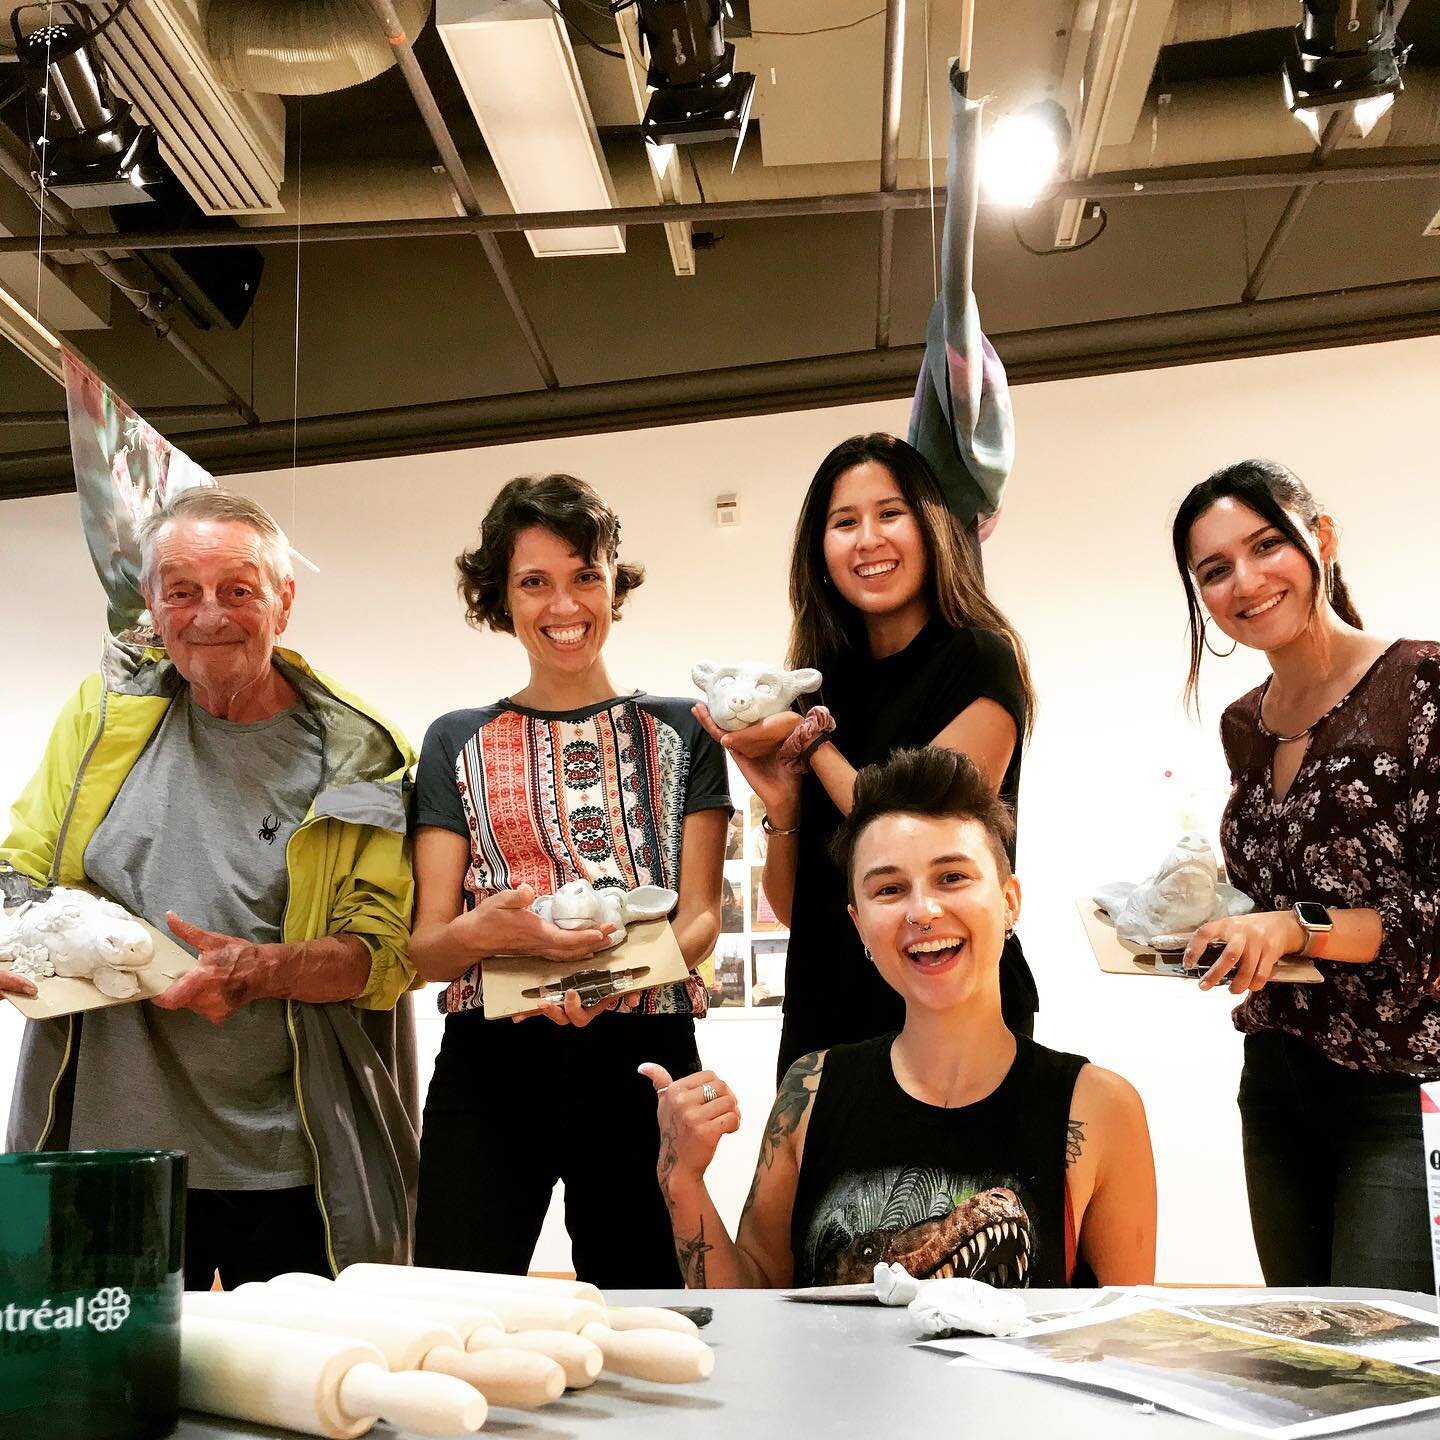 Thank you everyone for coming to the workshop at @maisonculturecdn , and thank you so much Ligia for organizing this! JP, Ligia, @danip37 and @https_aria Your animal faces look stunning! 
.
.
.
.
.
#workshop #claywork #clayworkshop #montrealarts #tra